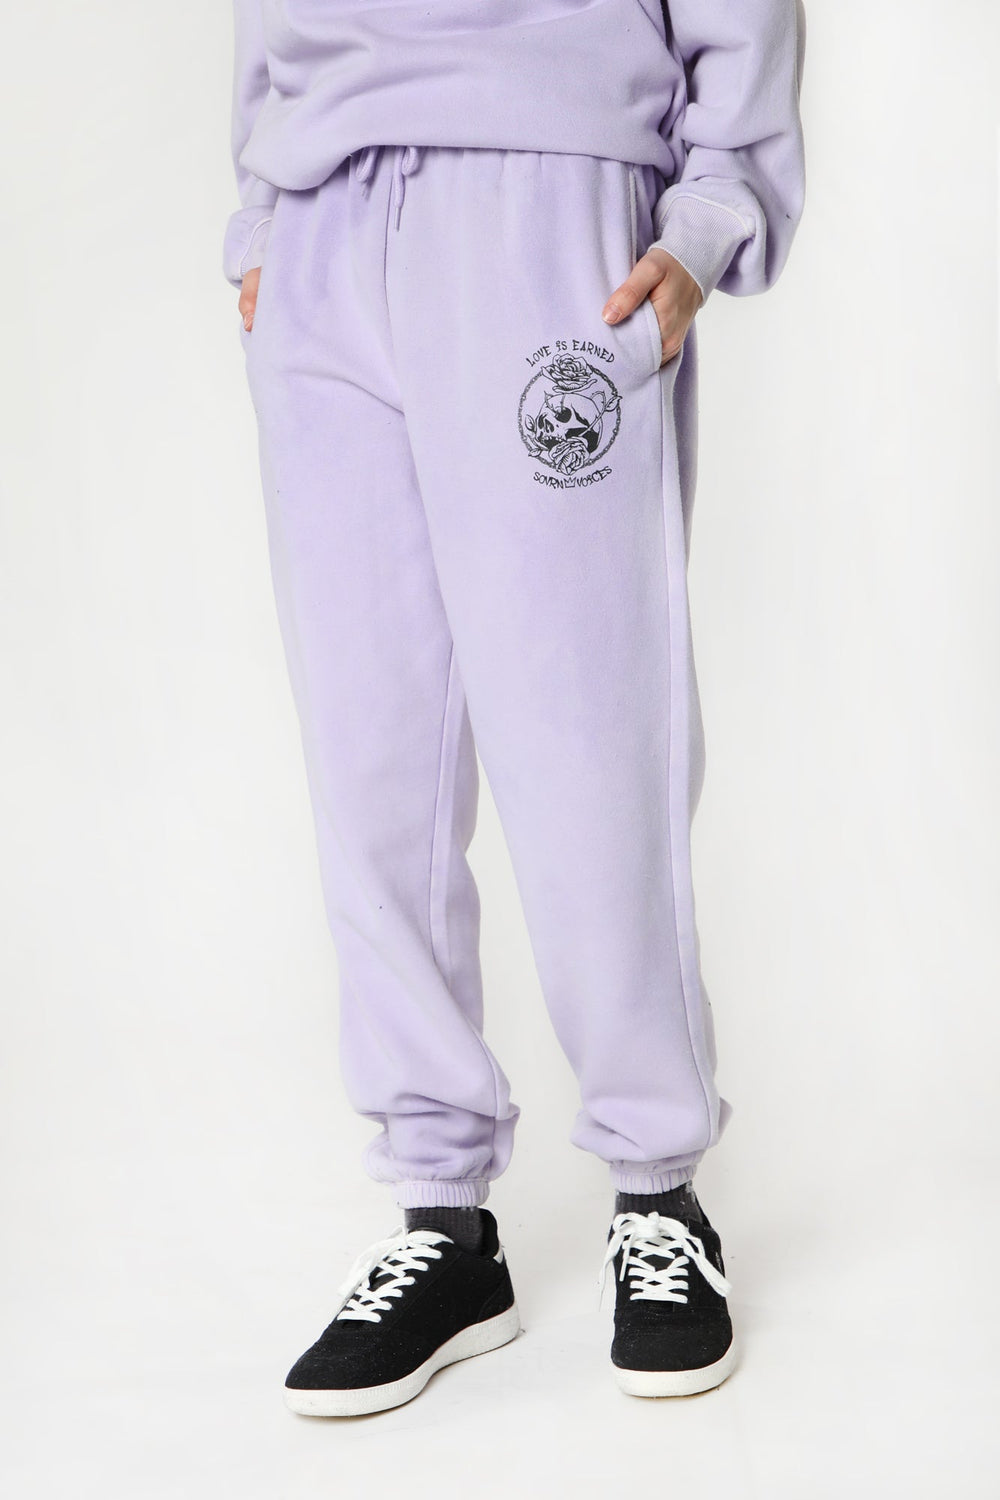 Womens Sovrn Voices Lilac Graphic Sweatpant Womens Sovrn Voices Lilac Graphic Sweatpant